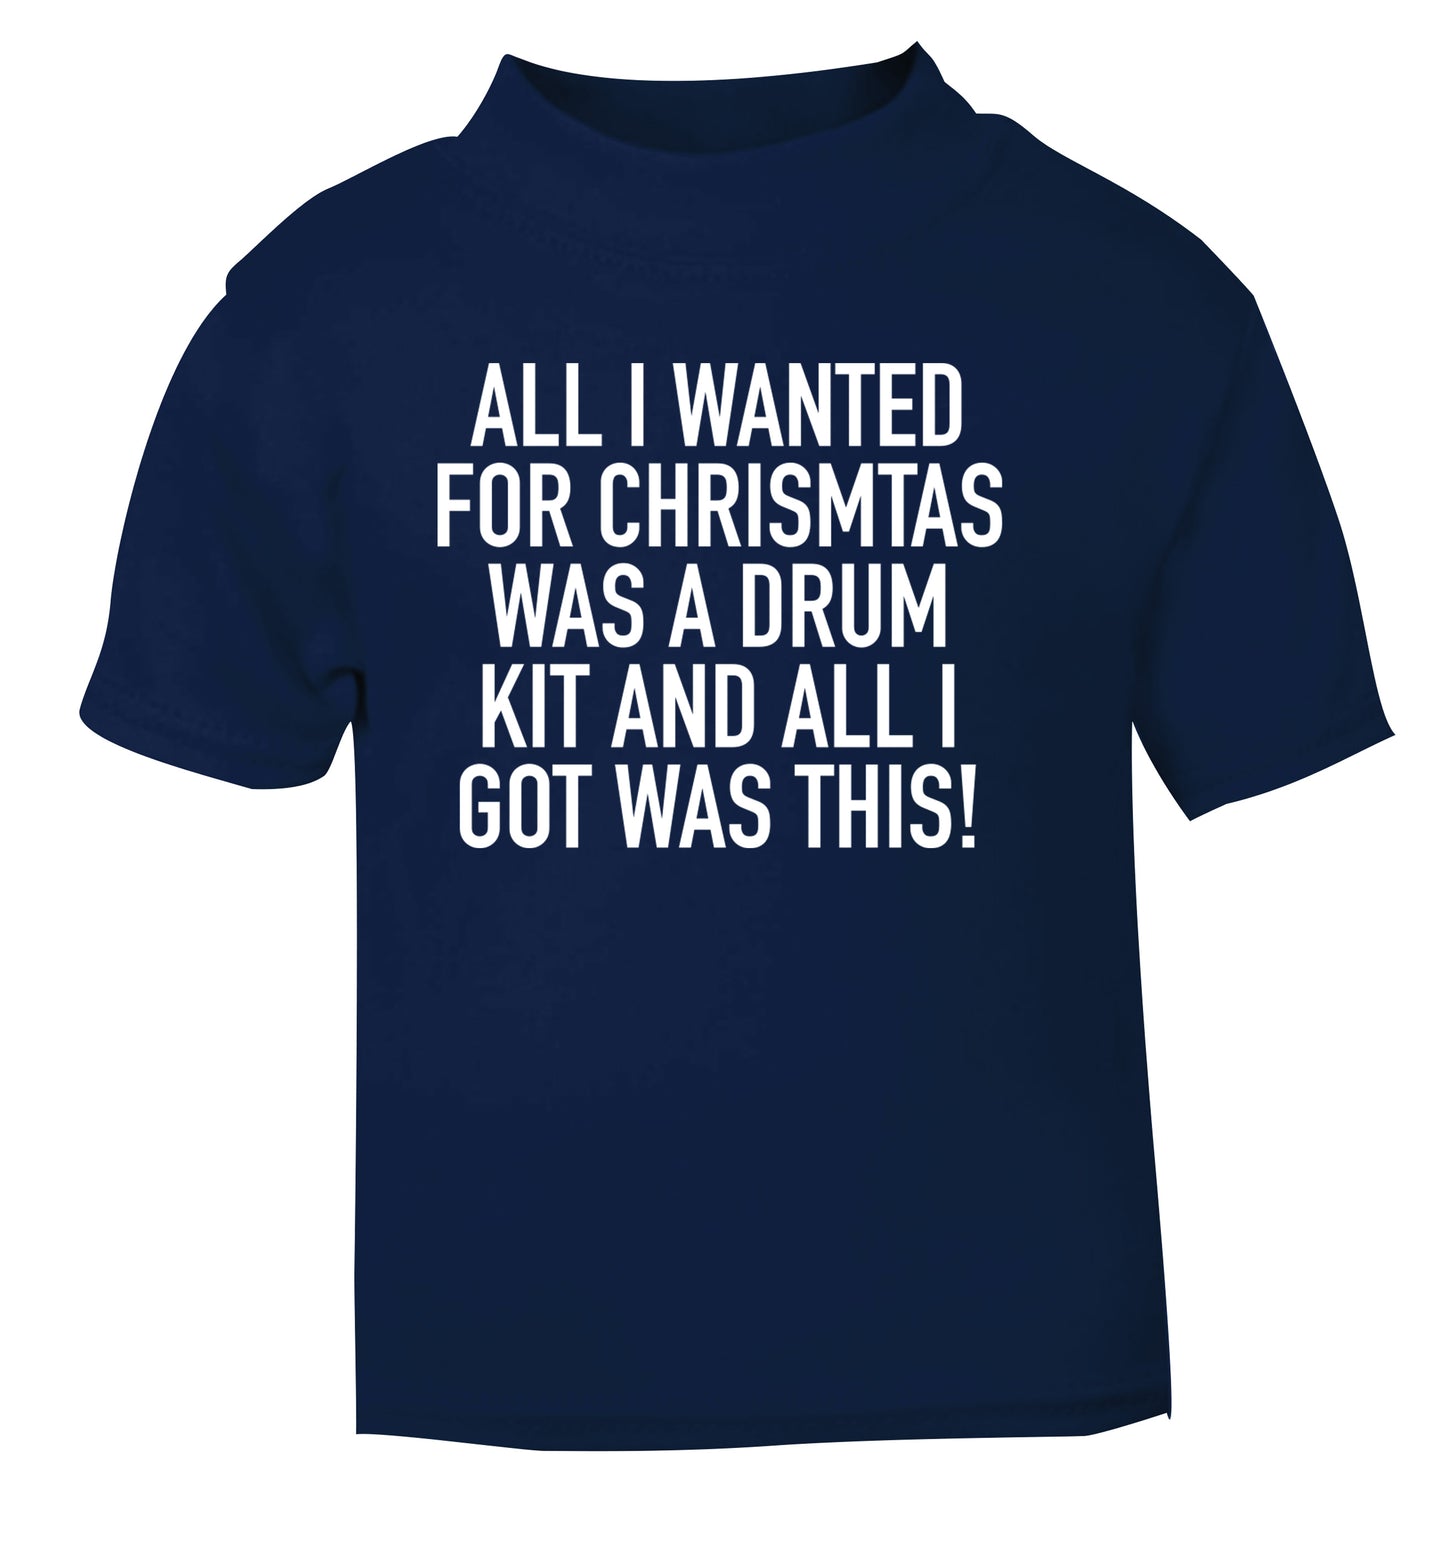 All I wanted for Christmas was a drum kit and all I got was this! navy Baby Toddler Tshirt 2 Years